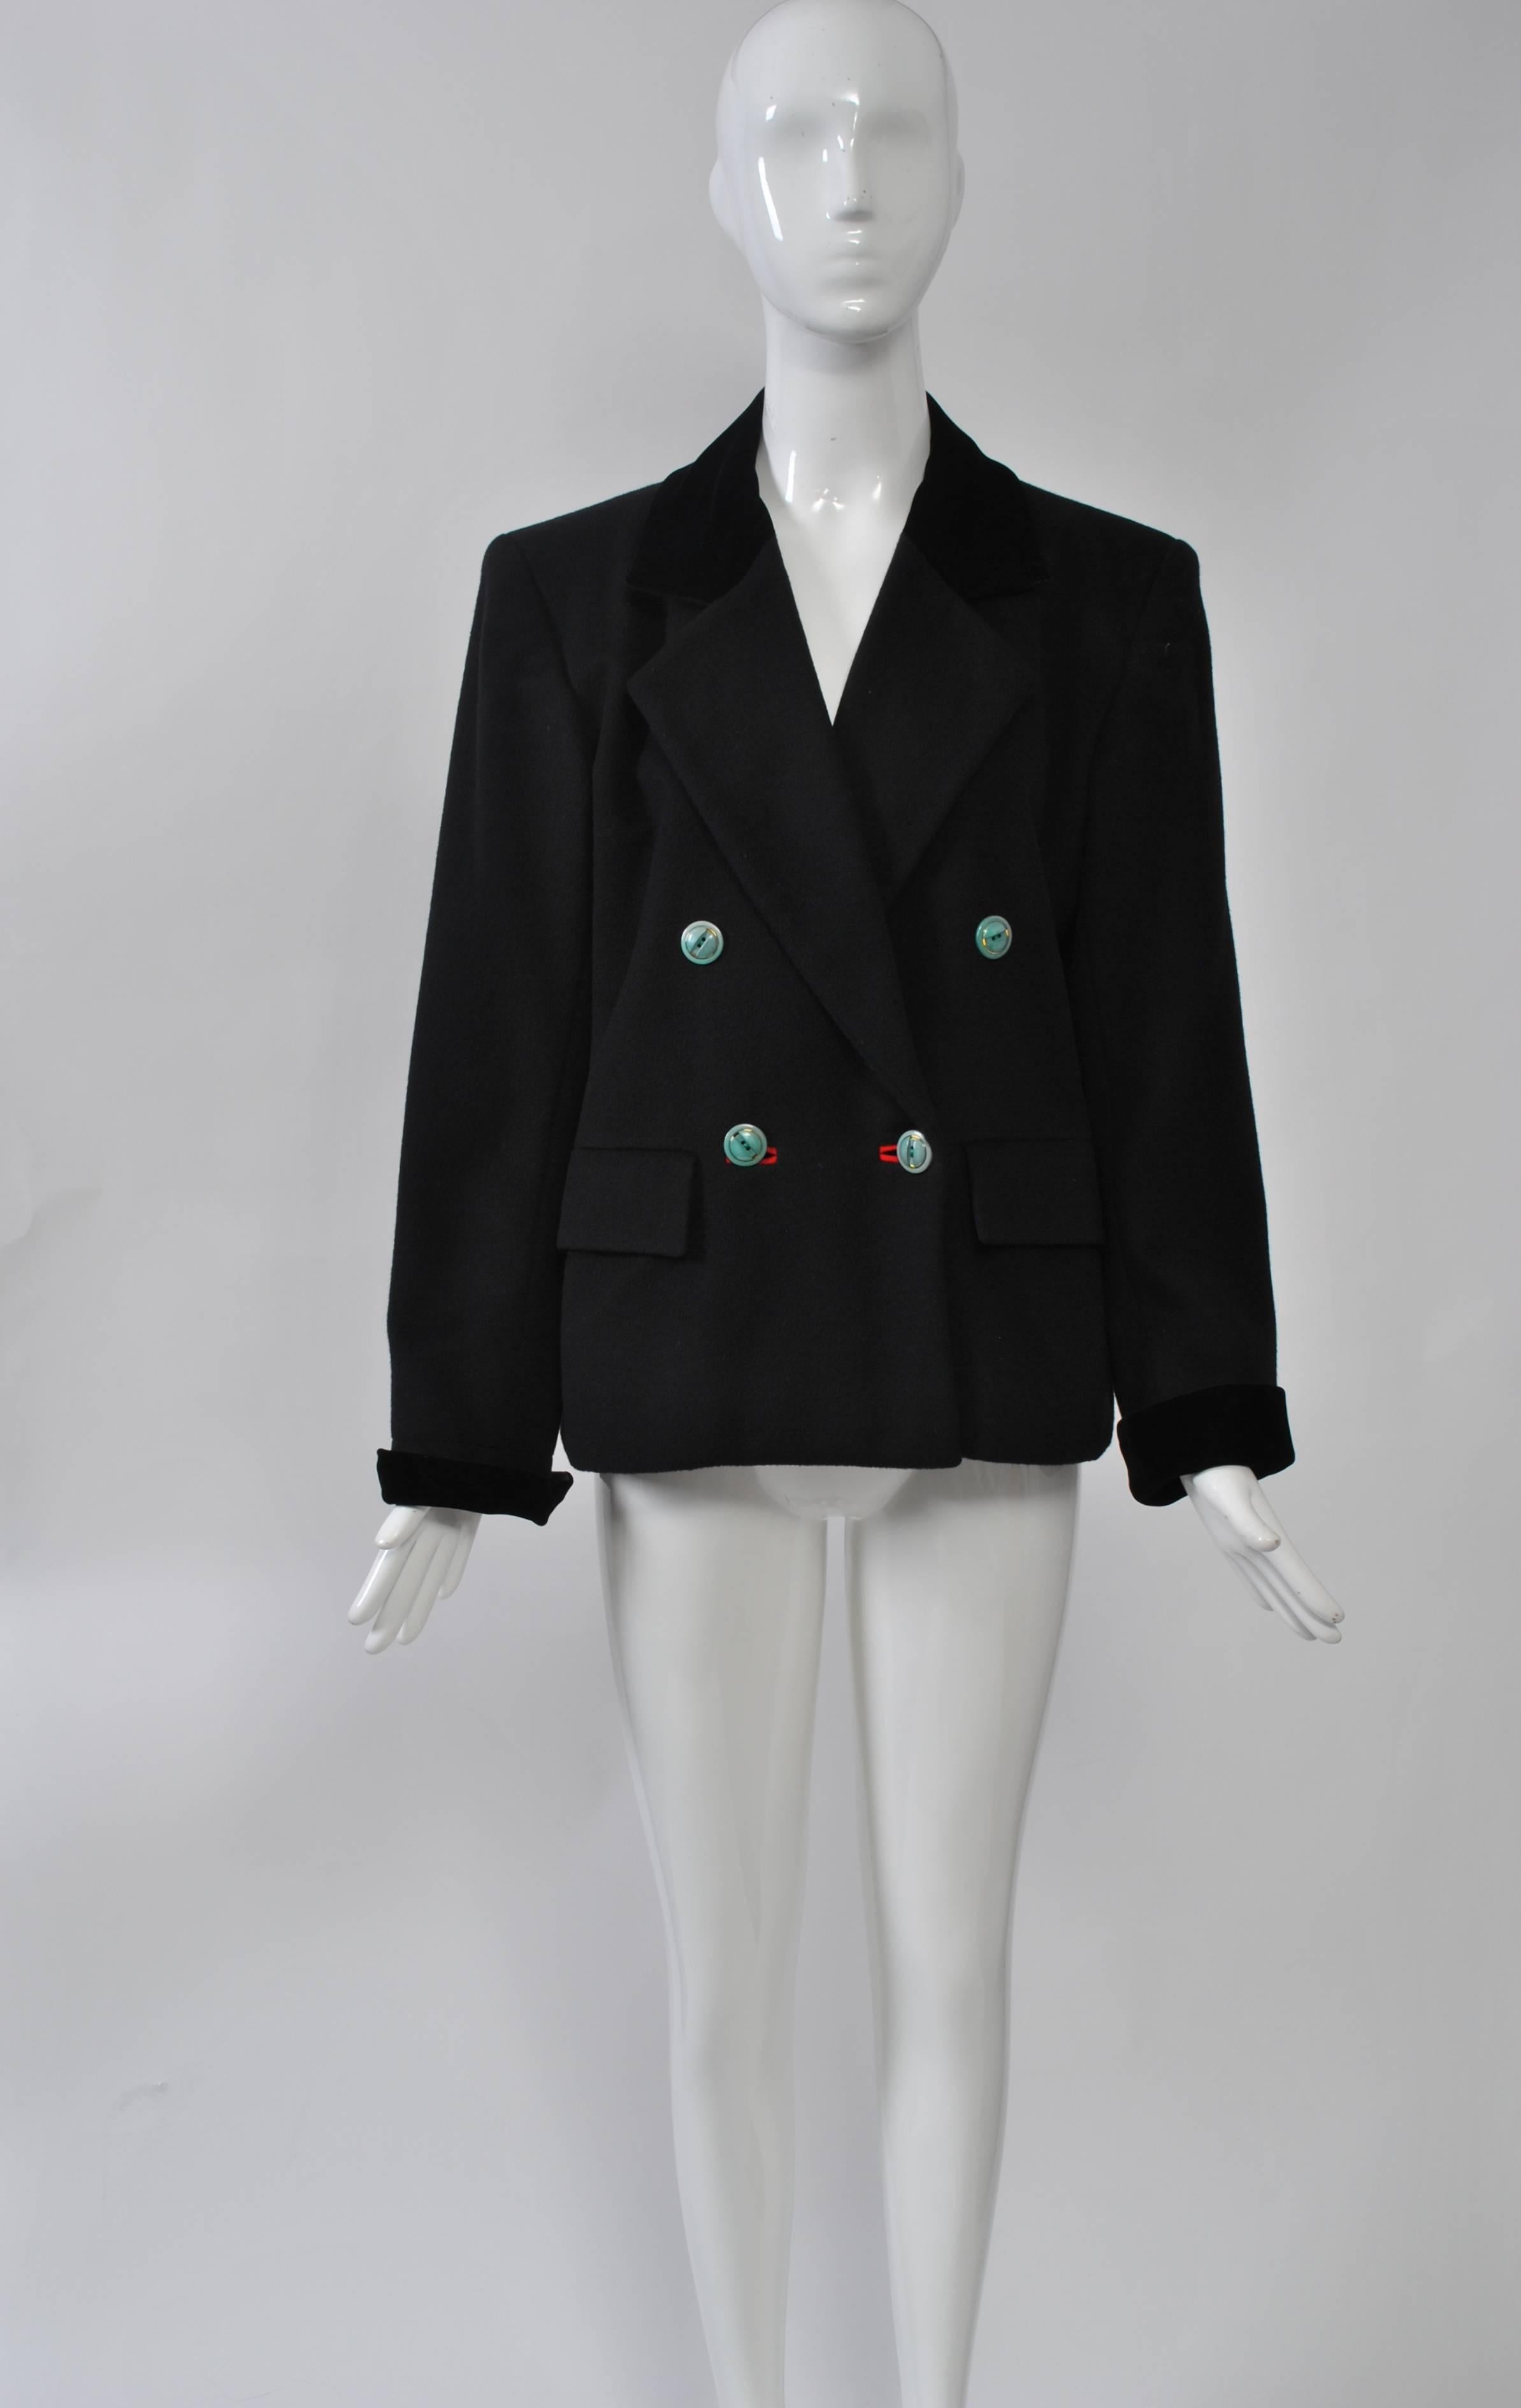 Saint Laurent Rive Gauche double-breasted jacket in a soft wool with a cashmere feel (no content label) offers an unexpected twist on a classic - aqua buttons in red-bound buttonholes. Wide lapels with black velvet half collar and turned-back cuffs.